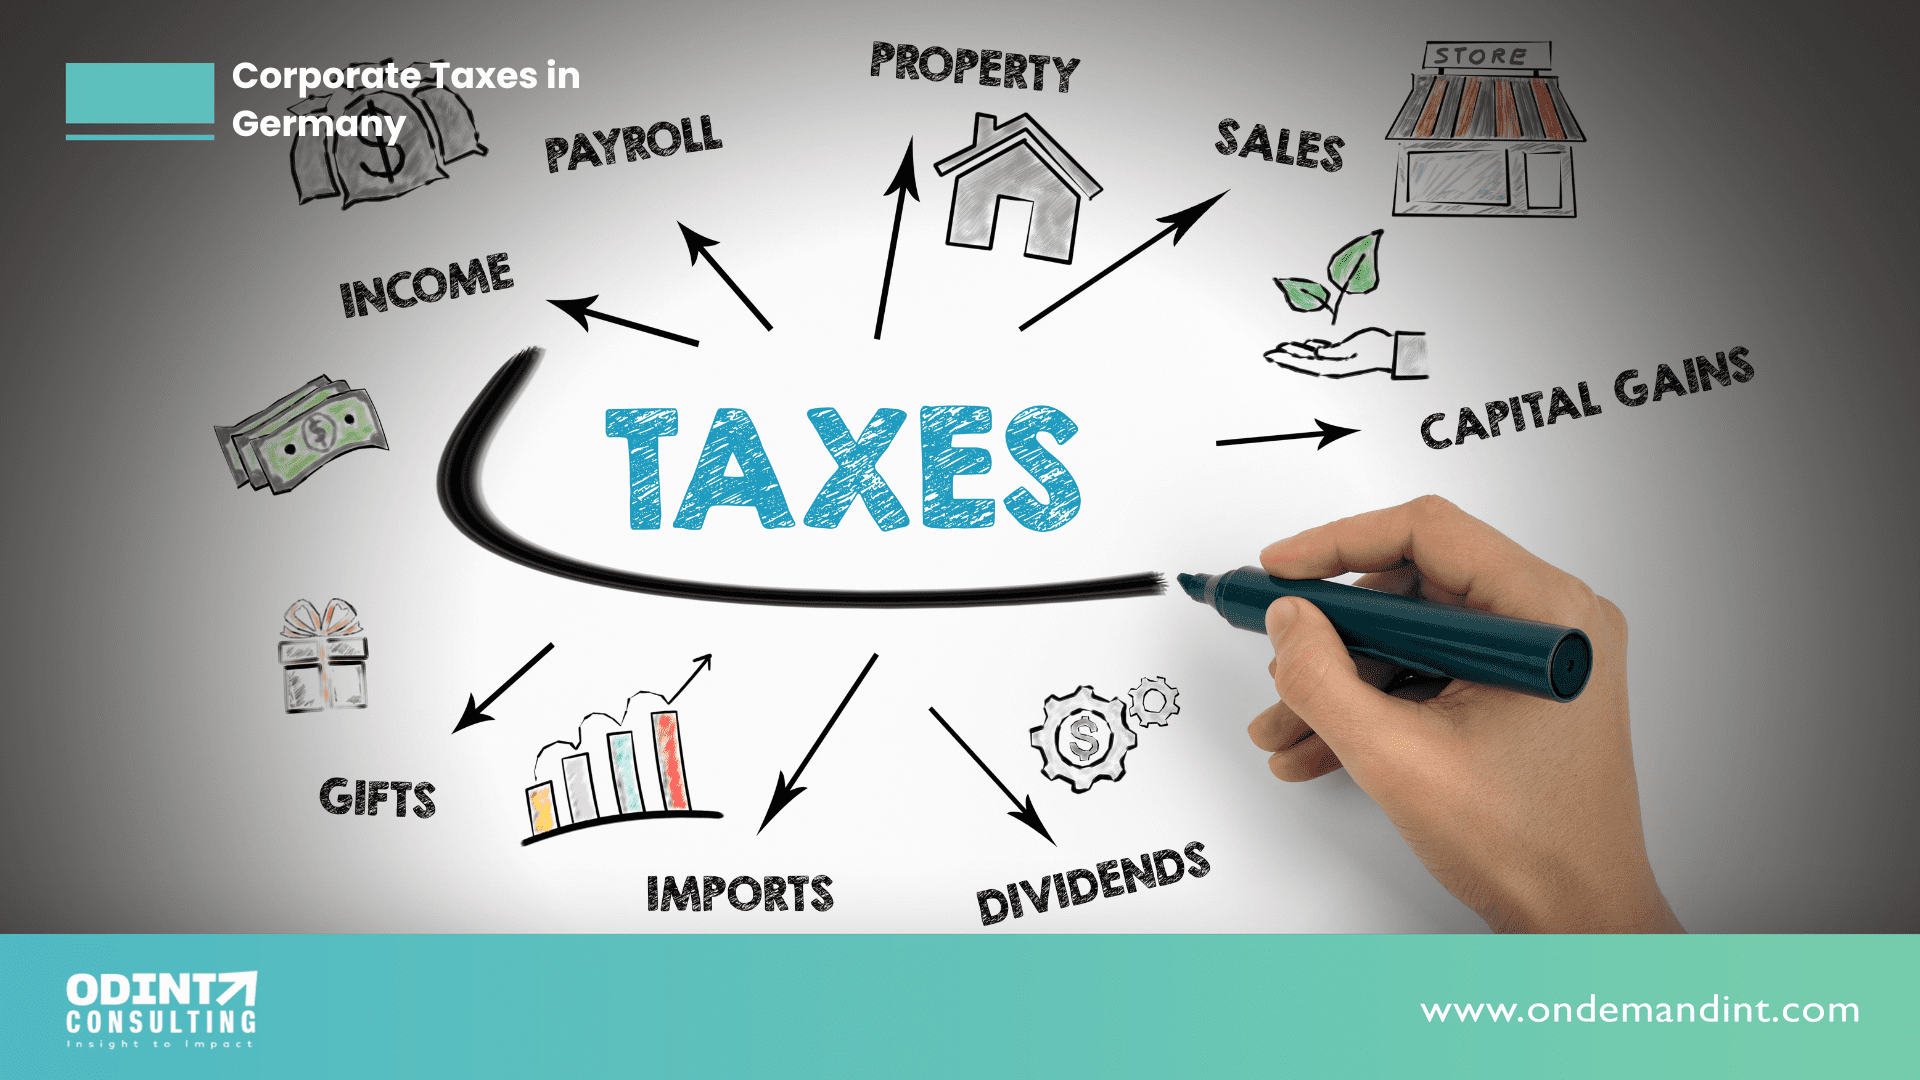 Corporate Taxes in Germany: Types, Filing Tax Return & Benefits